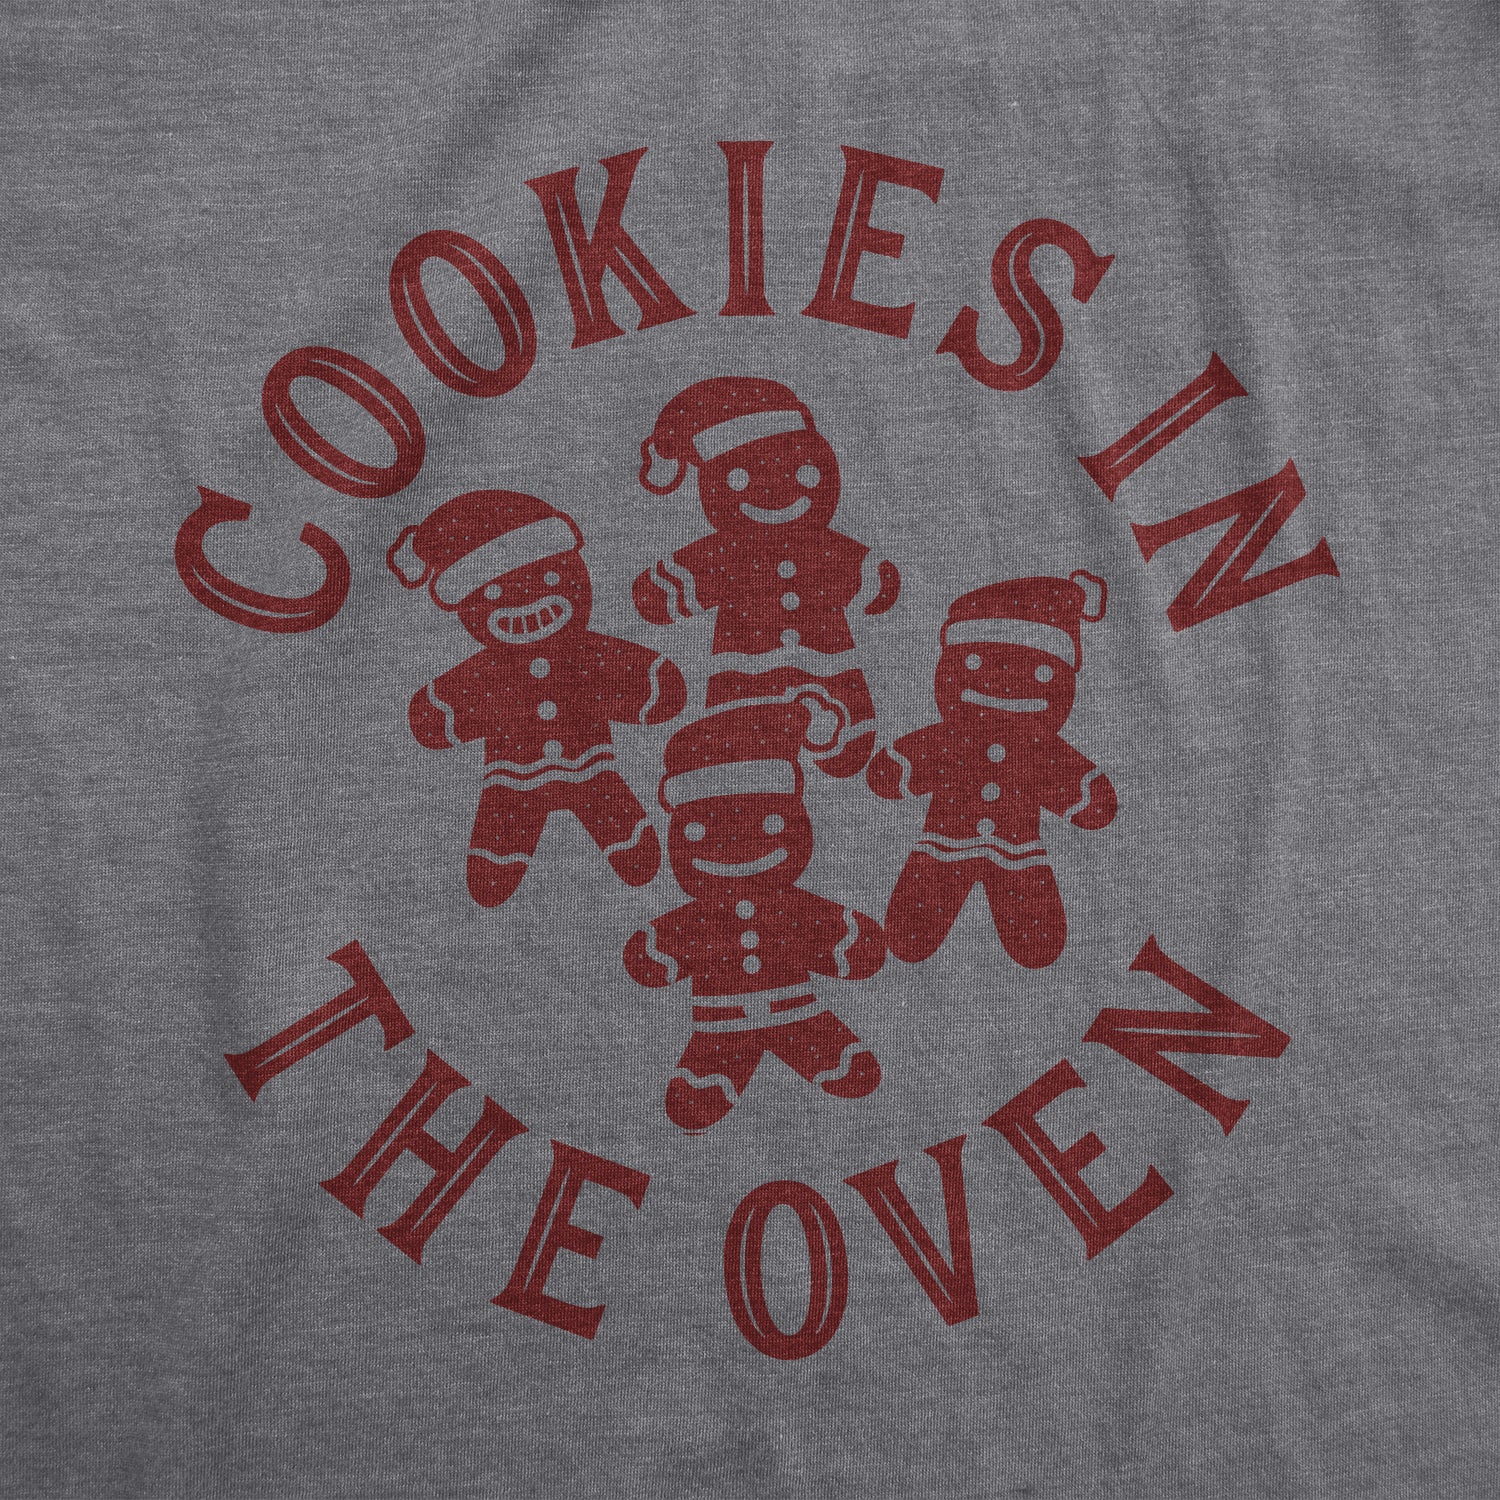 Funny Dark Heather Grey Cookies In The Oven Maternity T Shirt Nerdy Christmas food Tee